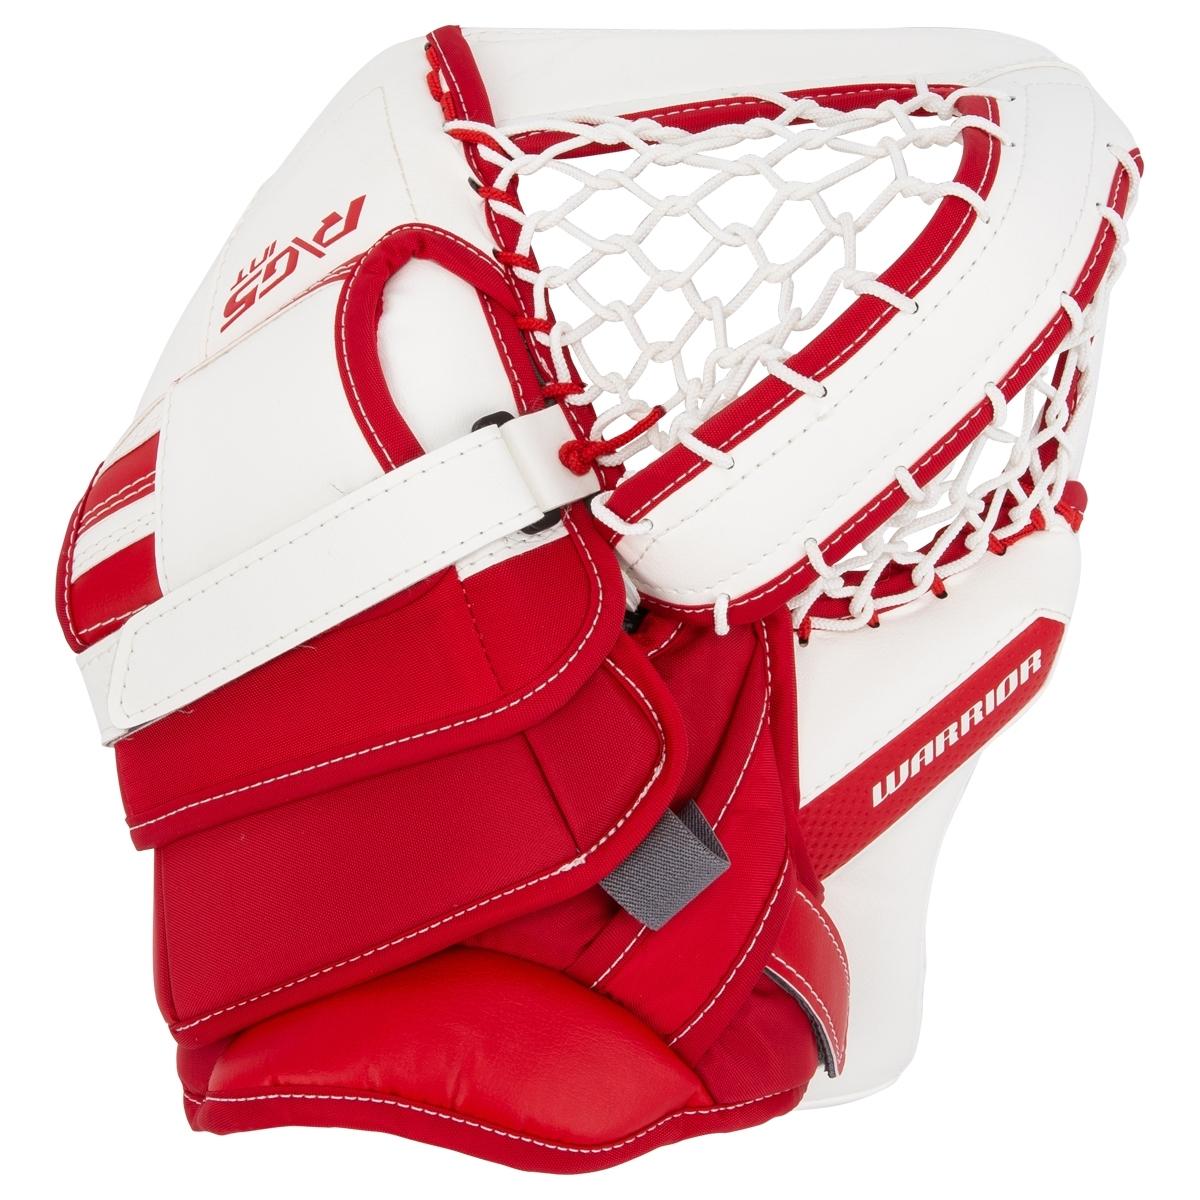 Warrior Ritual G5 Int. Goalie Gloveproduct zoom image #3